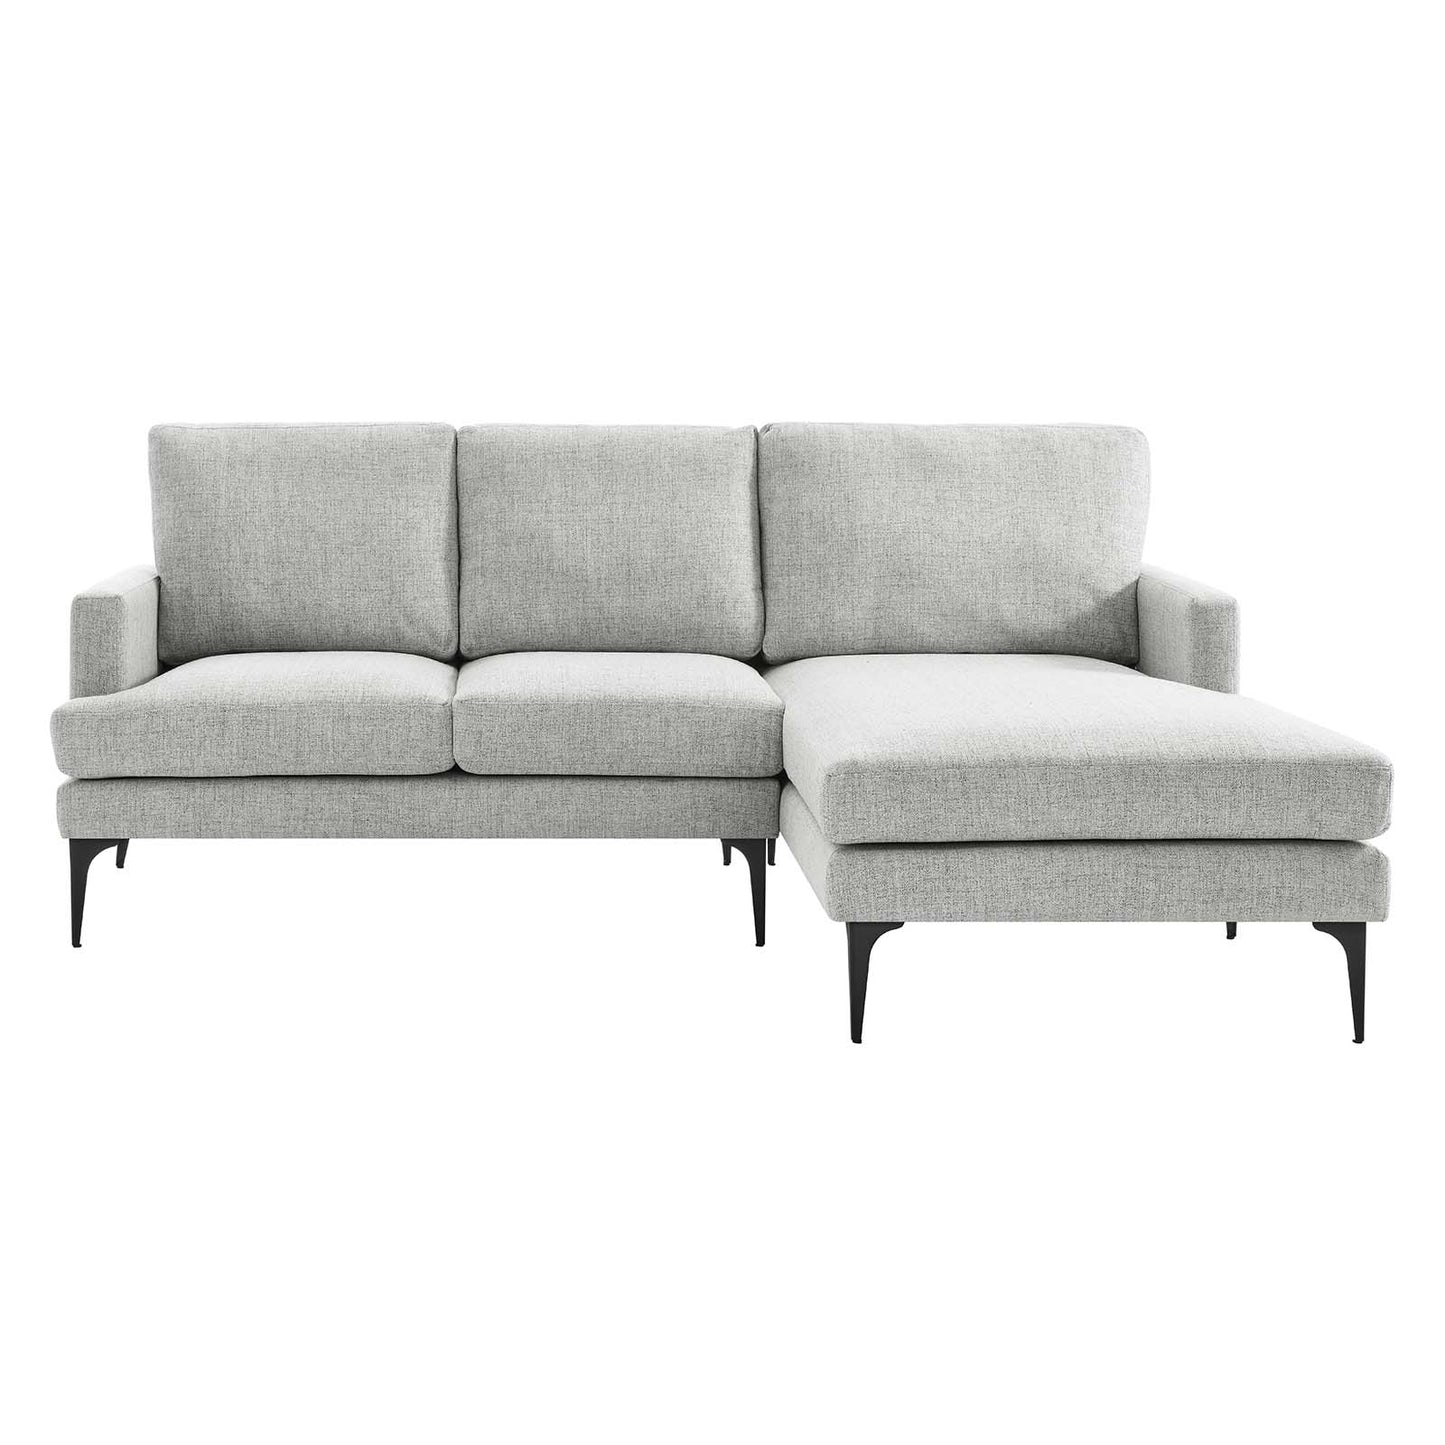 Evermore Right-Facing Upholstered Fabric Sectional Sofa Light Gray EEI-6012-LGR